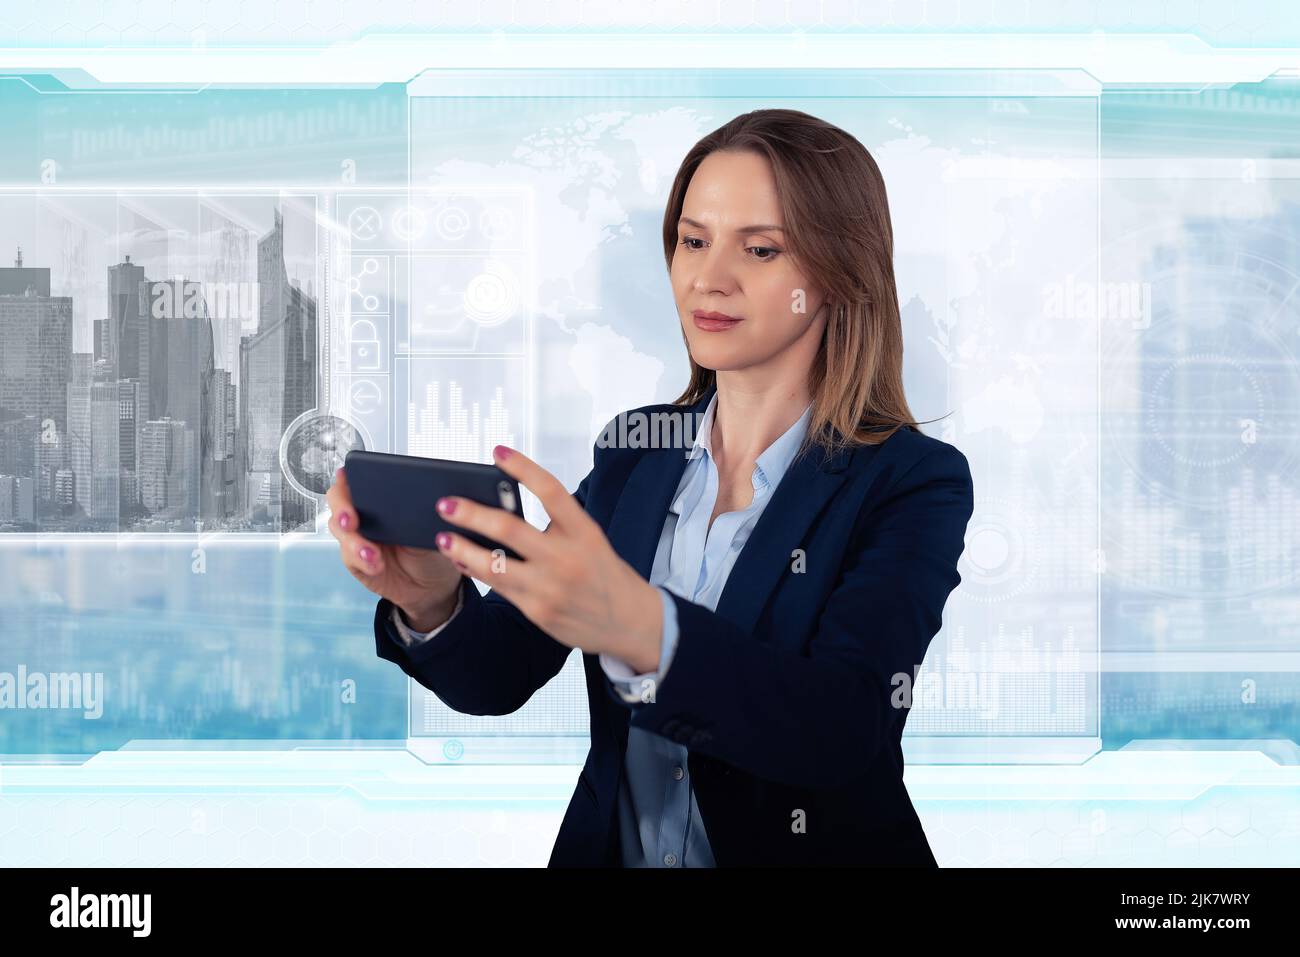 Future technology with holographic interface. Futuristic business woman on scientific background. Global business concept Stock Photo